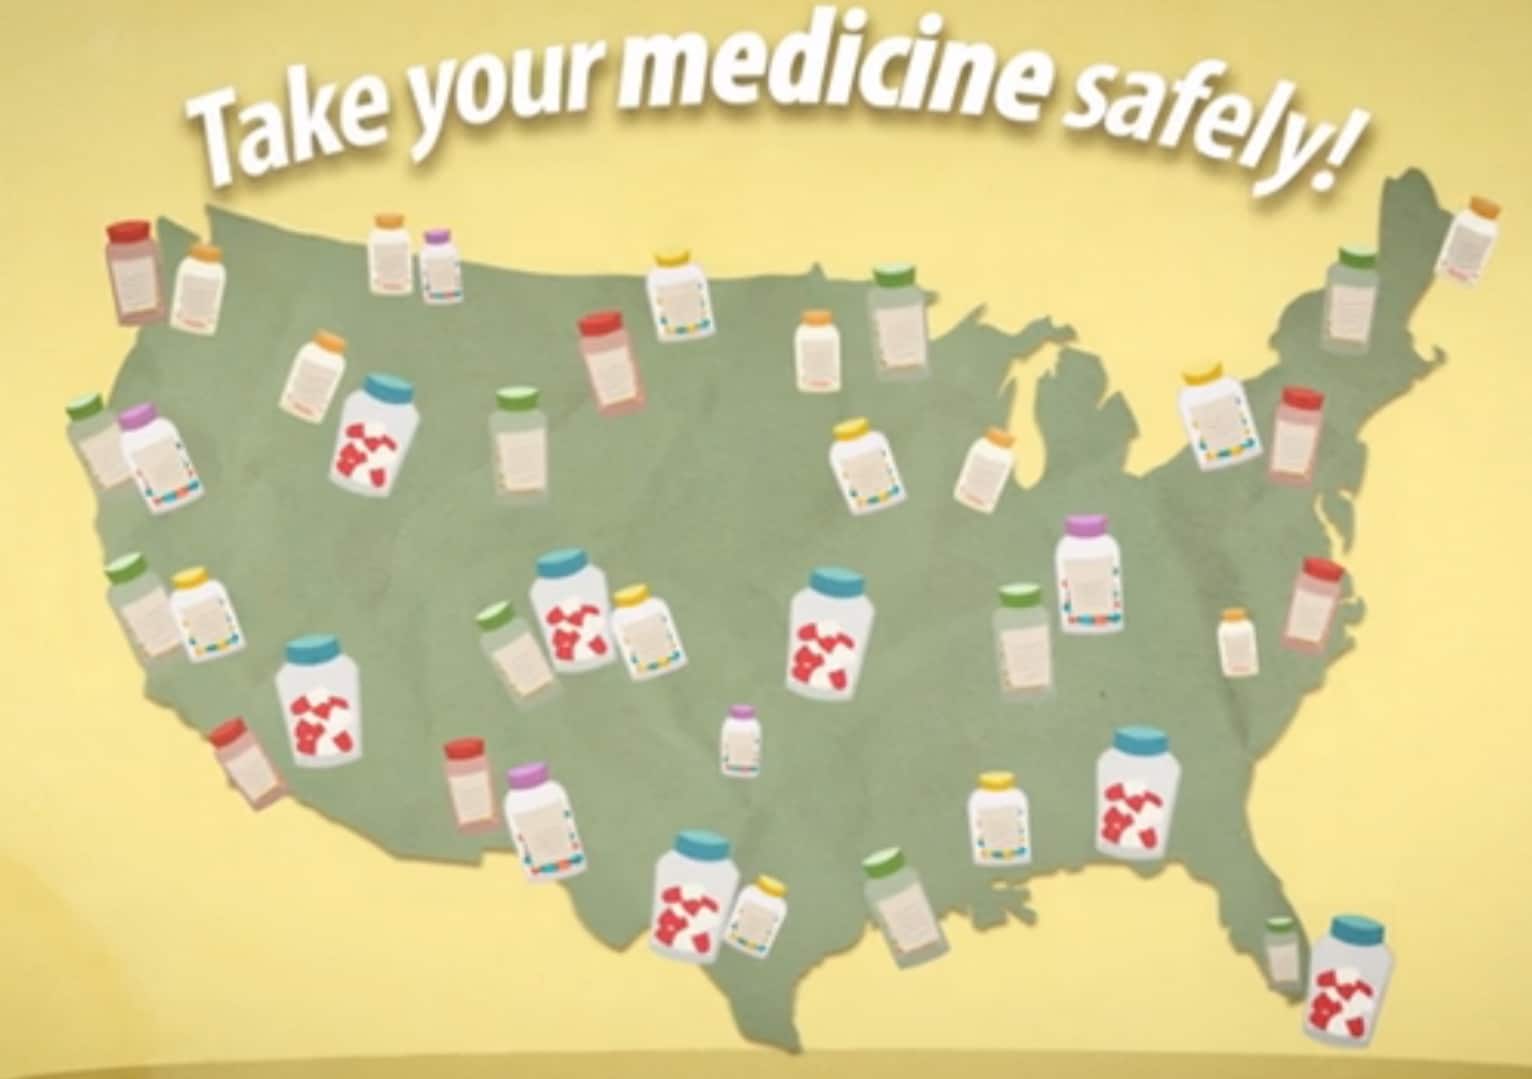 Alliance Puts Focus on Medication Safety during National Poison Prevention Week